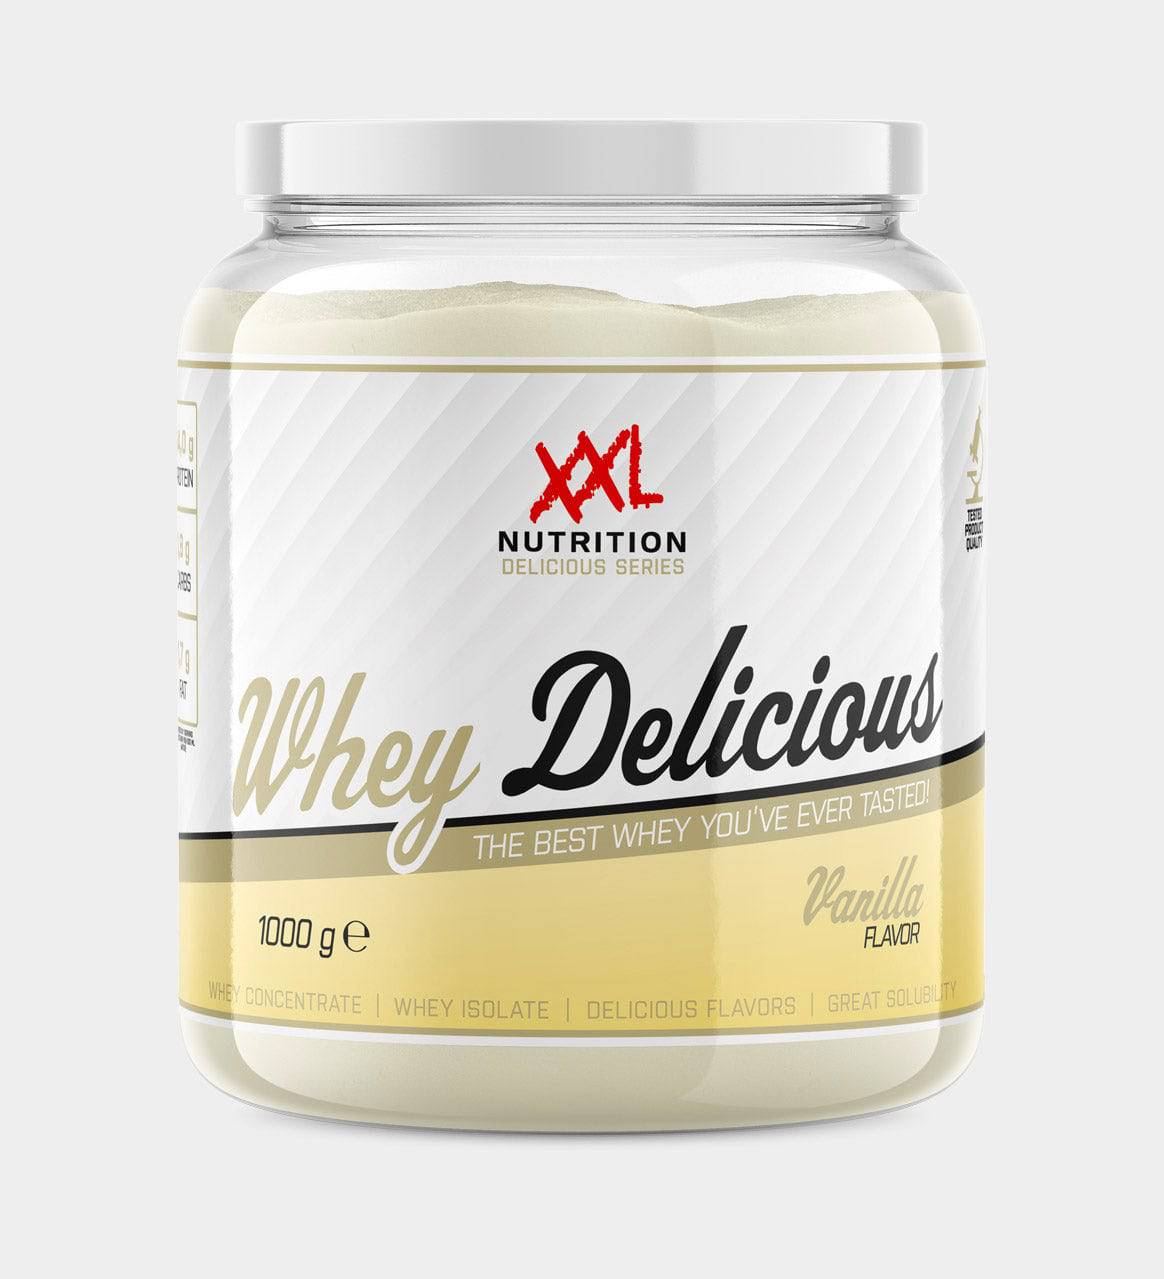 XXL Nutrition - Whey Delicious proteine shake - Booster Fight Store